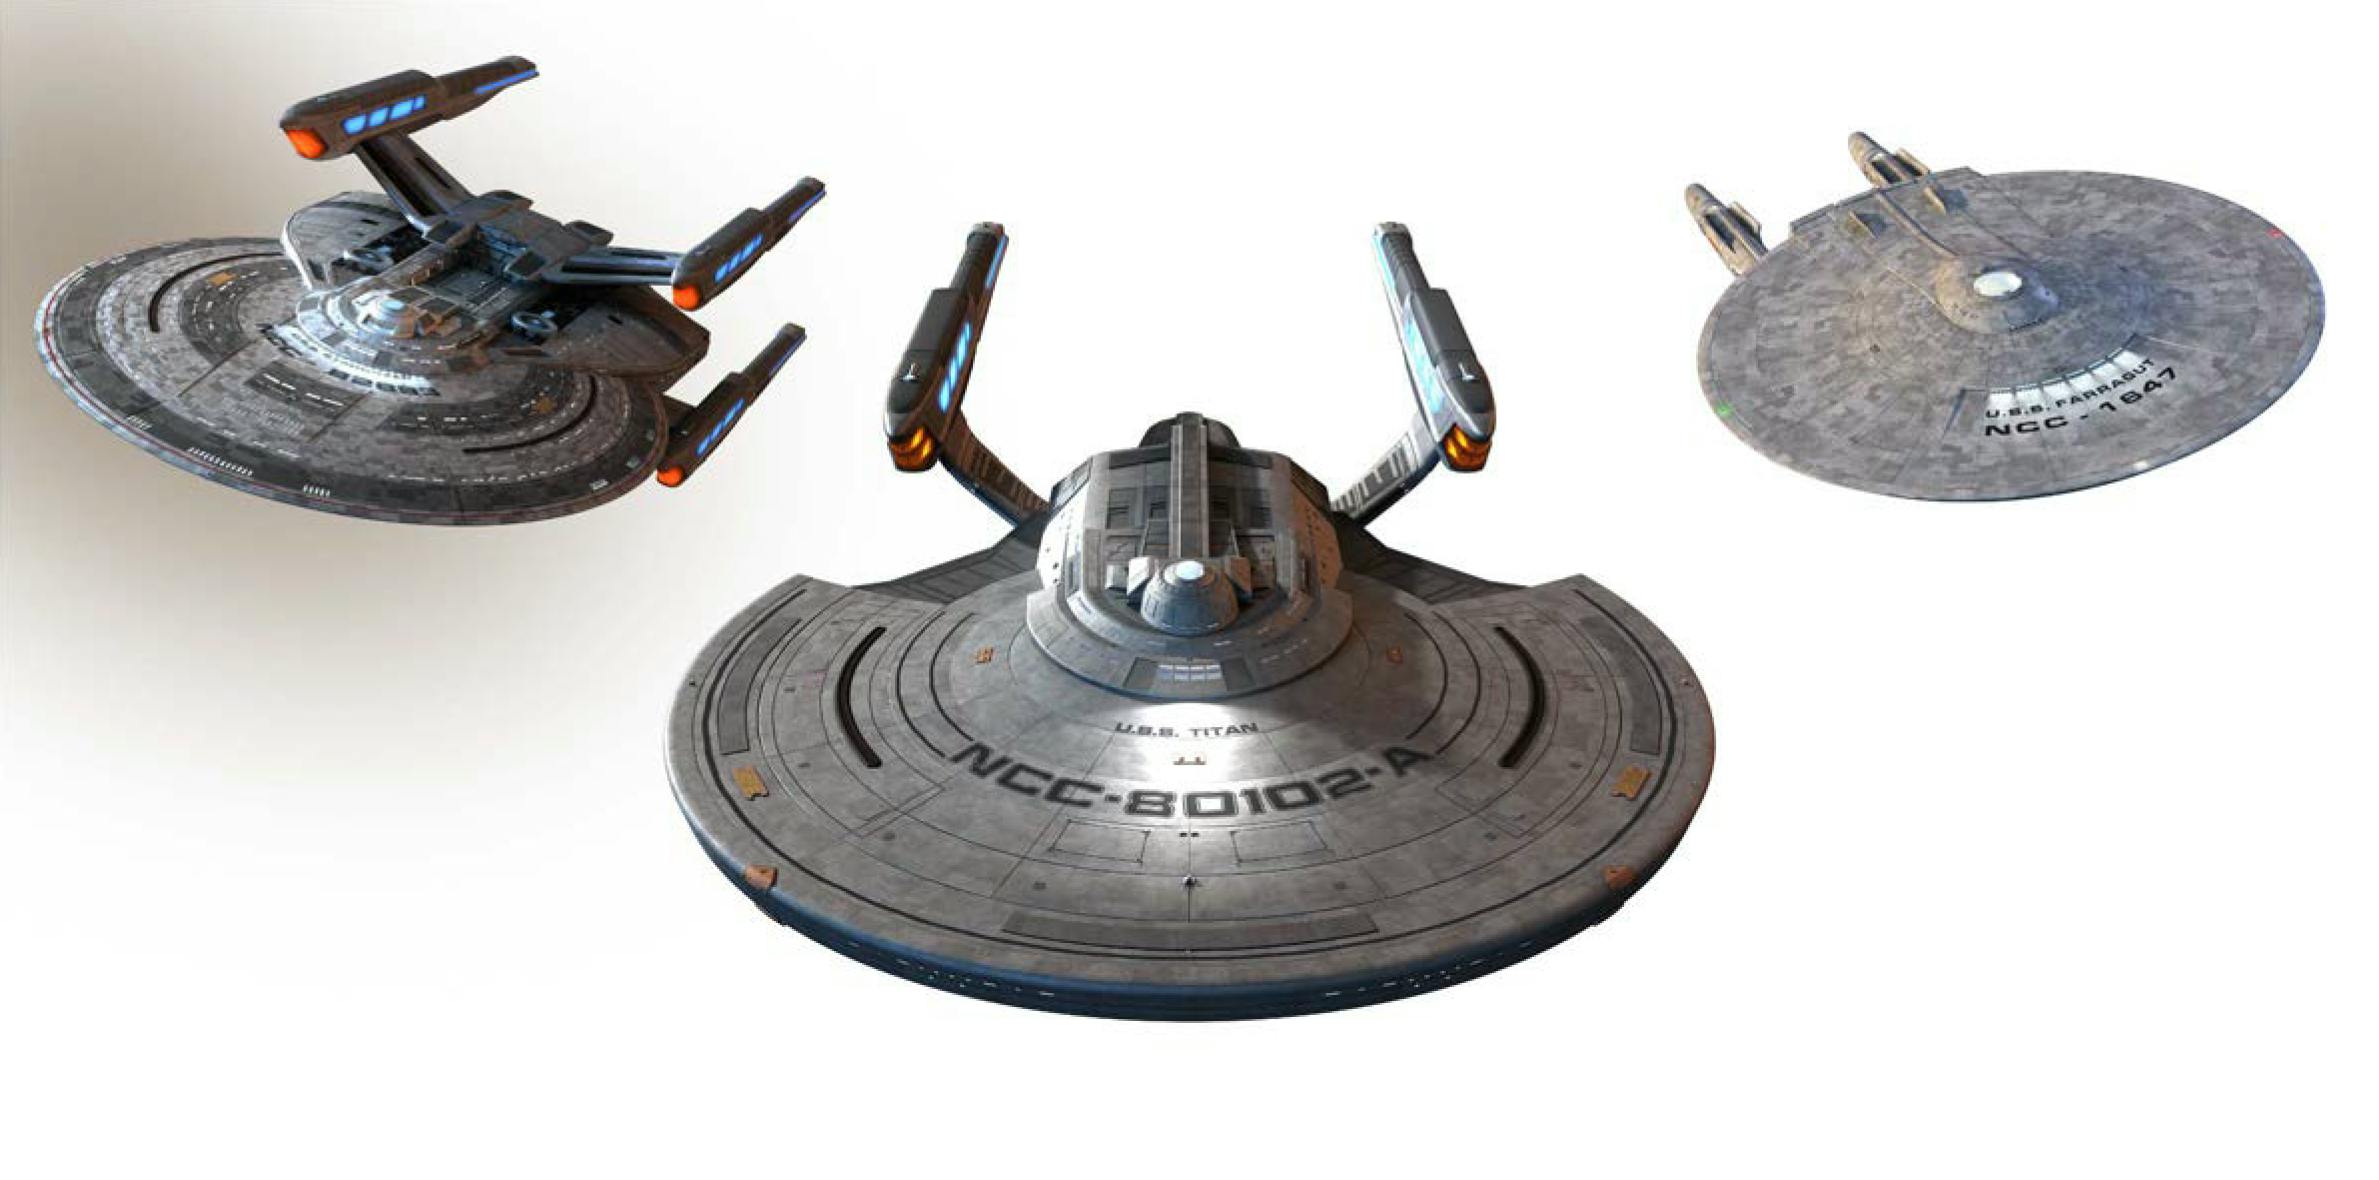 Fanhome rendering of starship models of the U.S.S. Stargazer NCC-82893, U.S.S. Titan NCC-80201-A, and U.S.S. Farragut NCC-1647